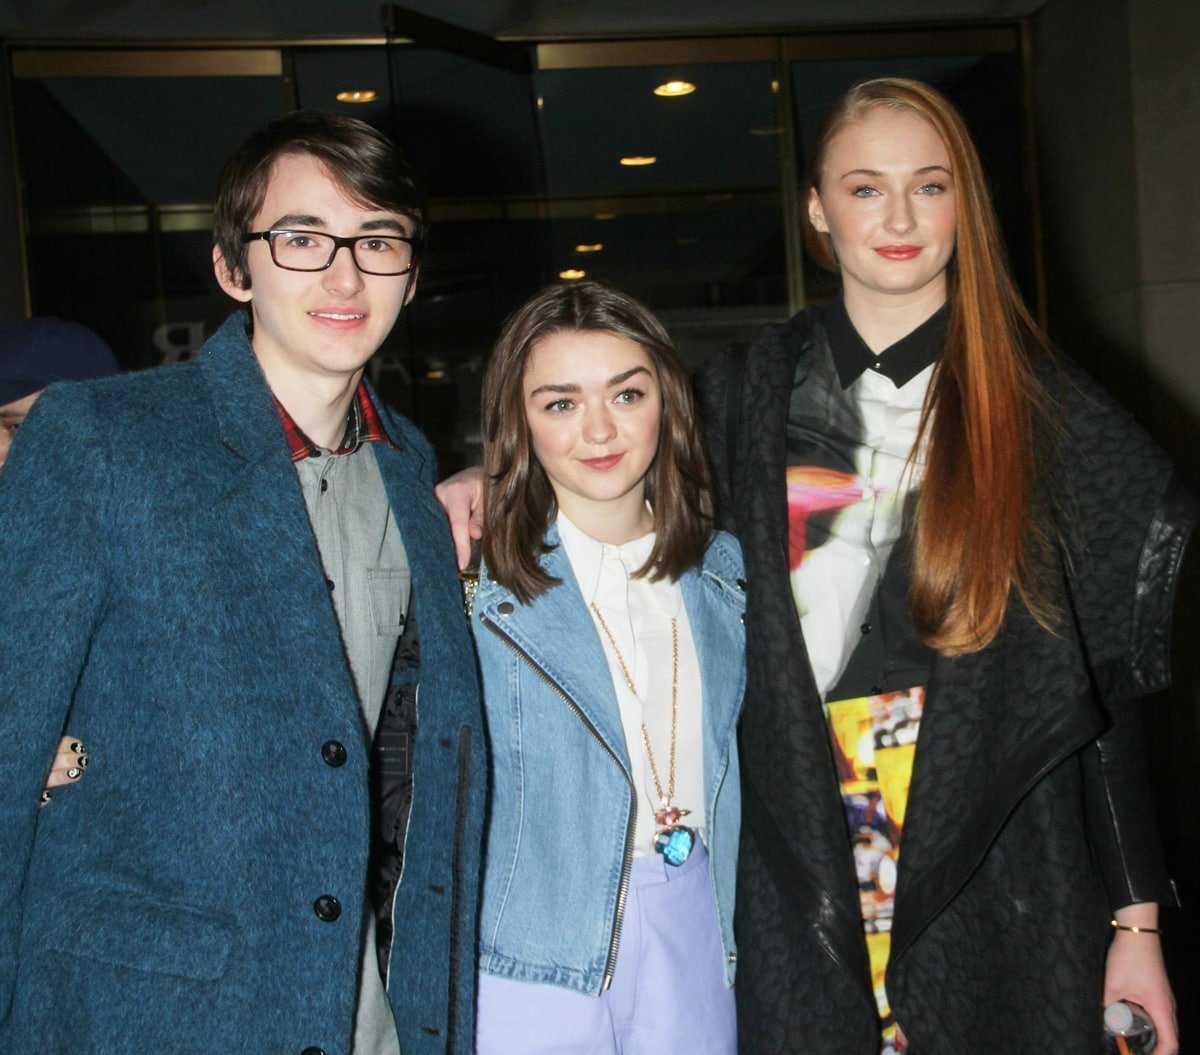 Sophie Turner, Maisie Williams, and Isaac Hempstead Wright grew up on the set of Game of Thrones